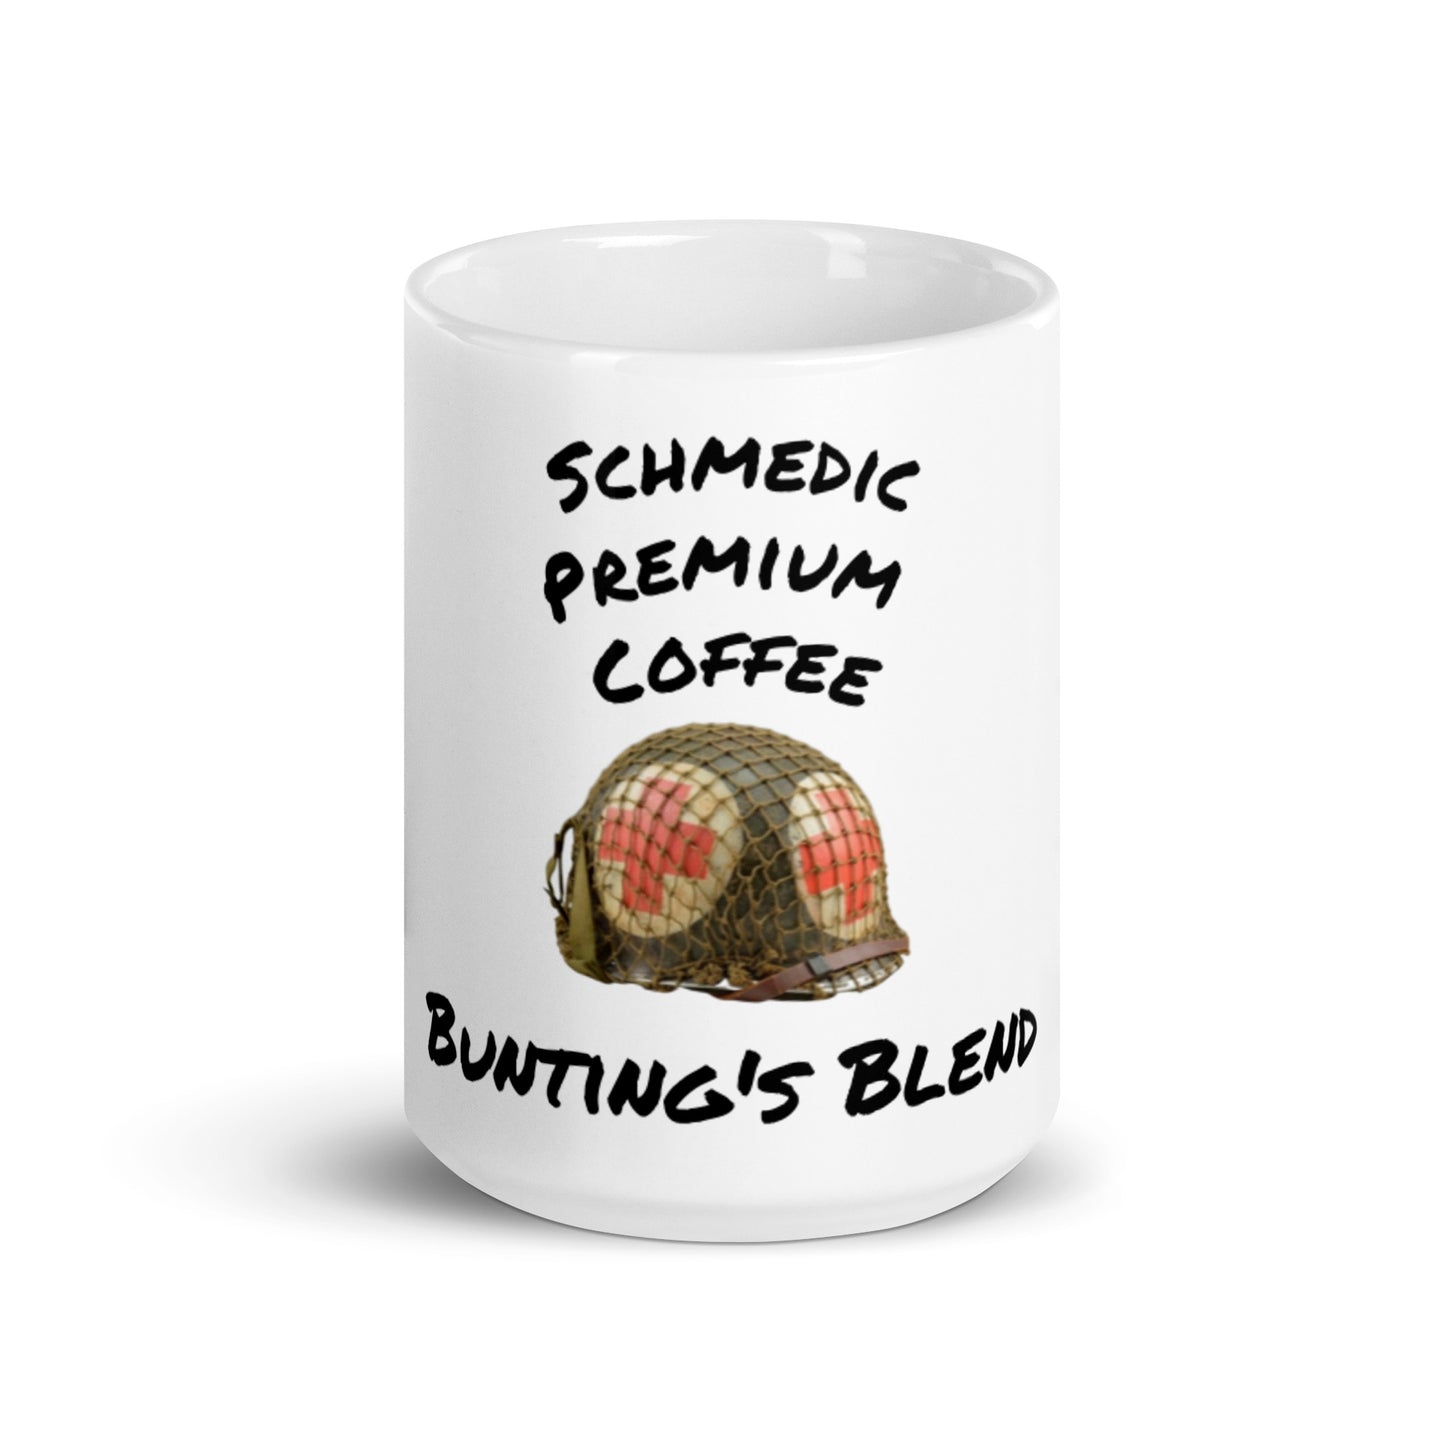 Bunting's Blend Coffee Cup